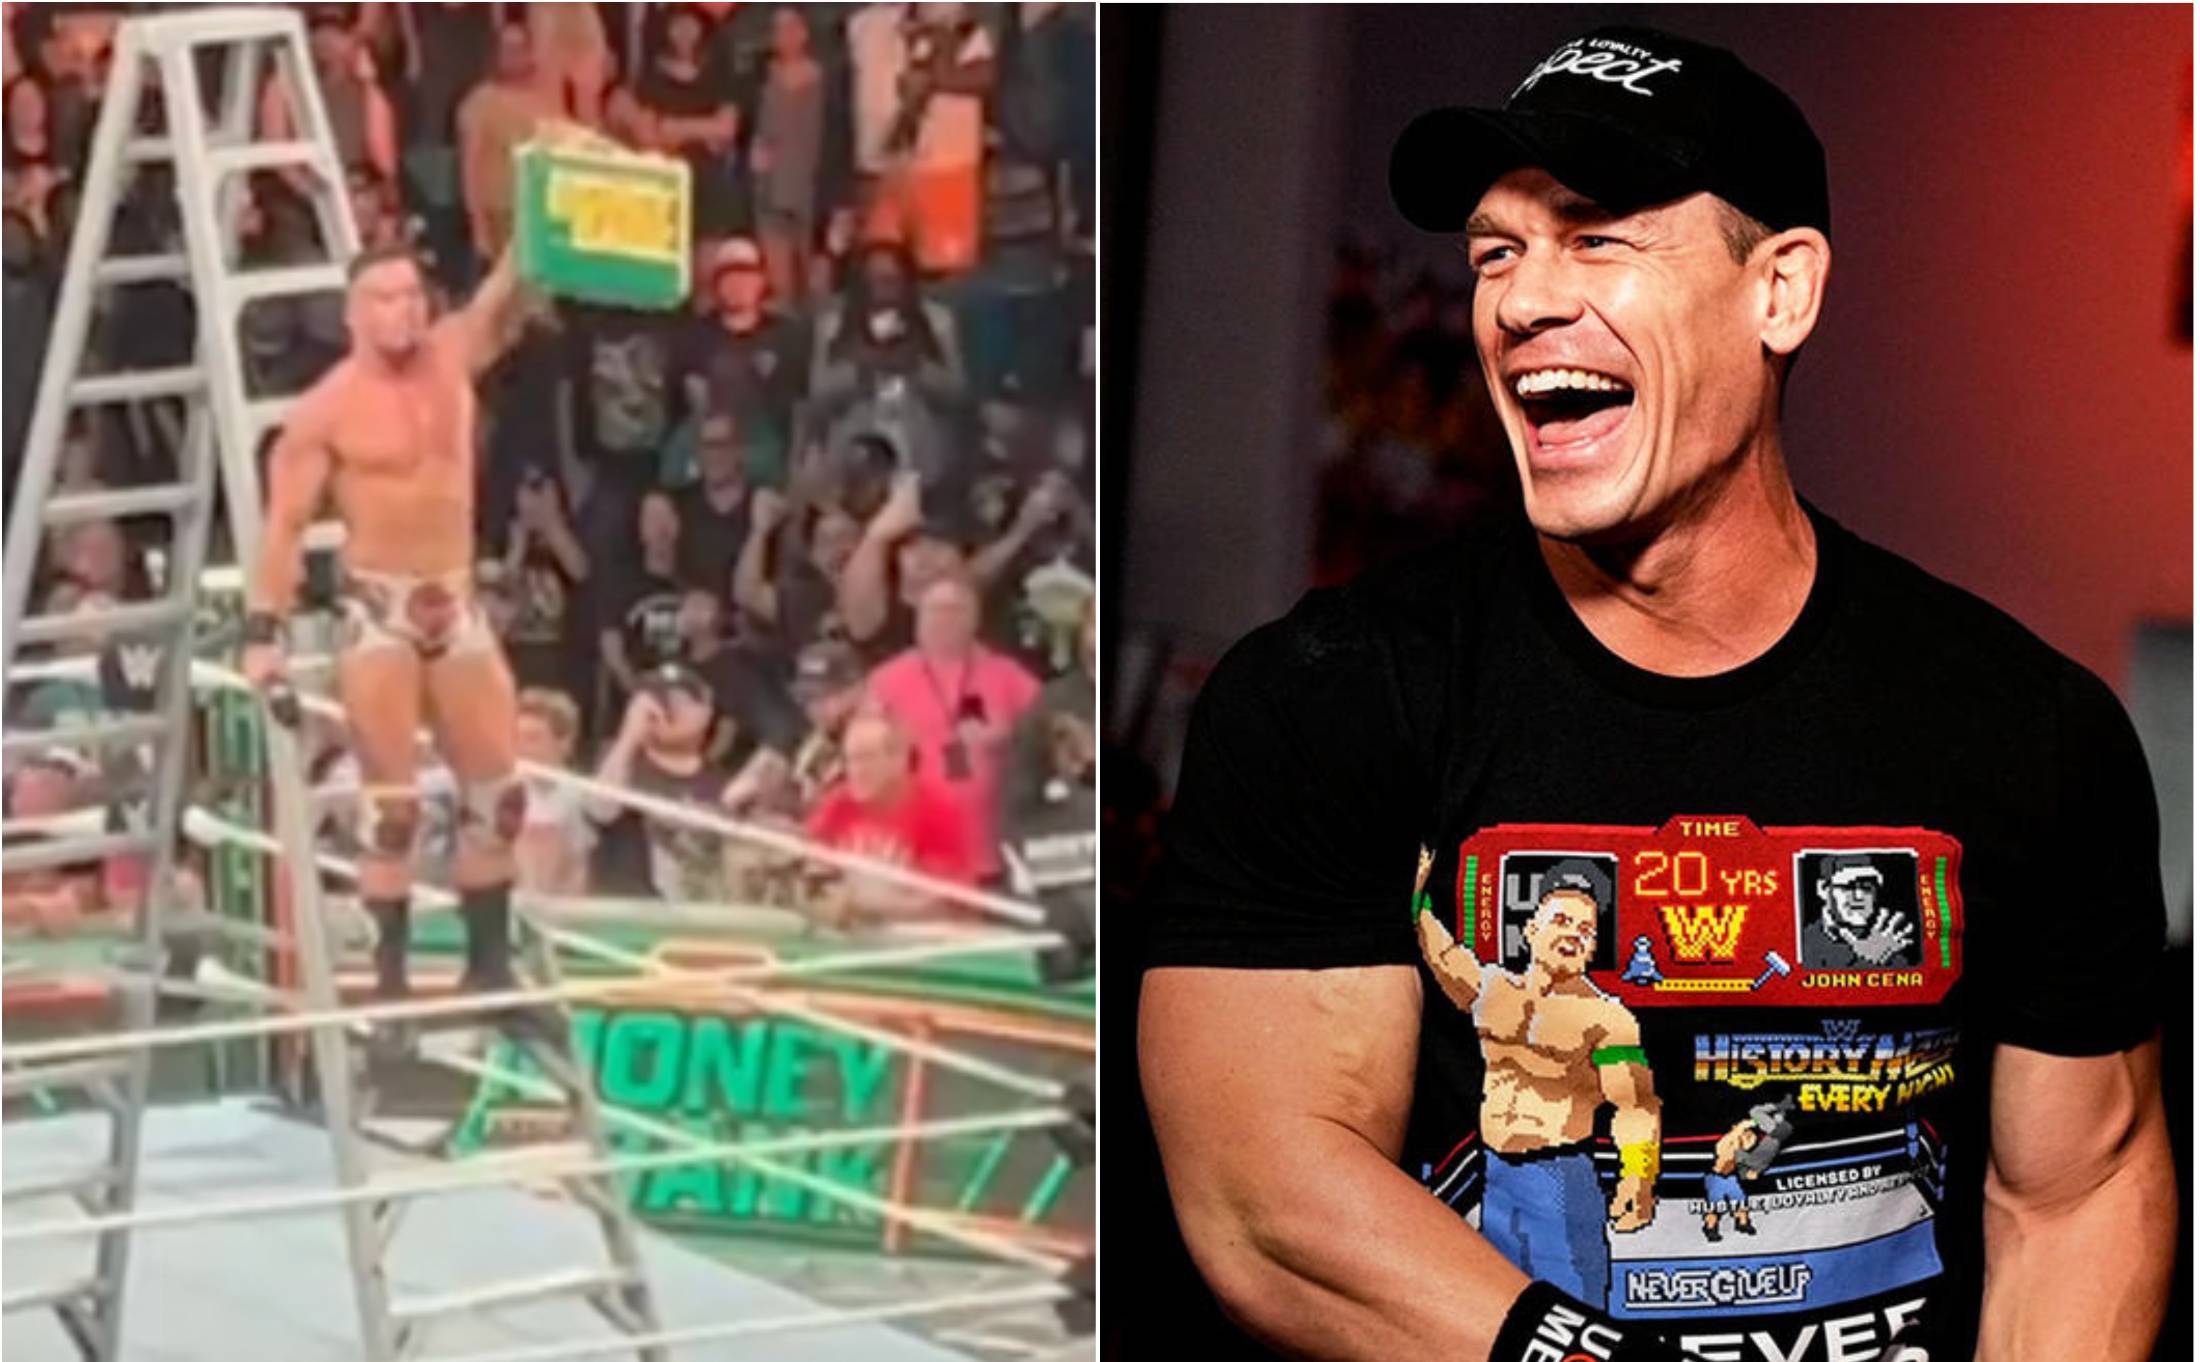 Theory called out John Cena after winning WWE Money in the Bank